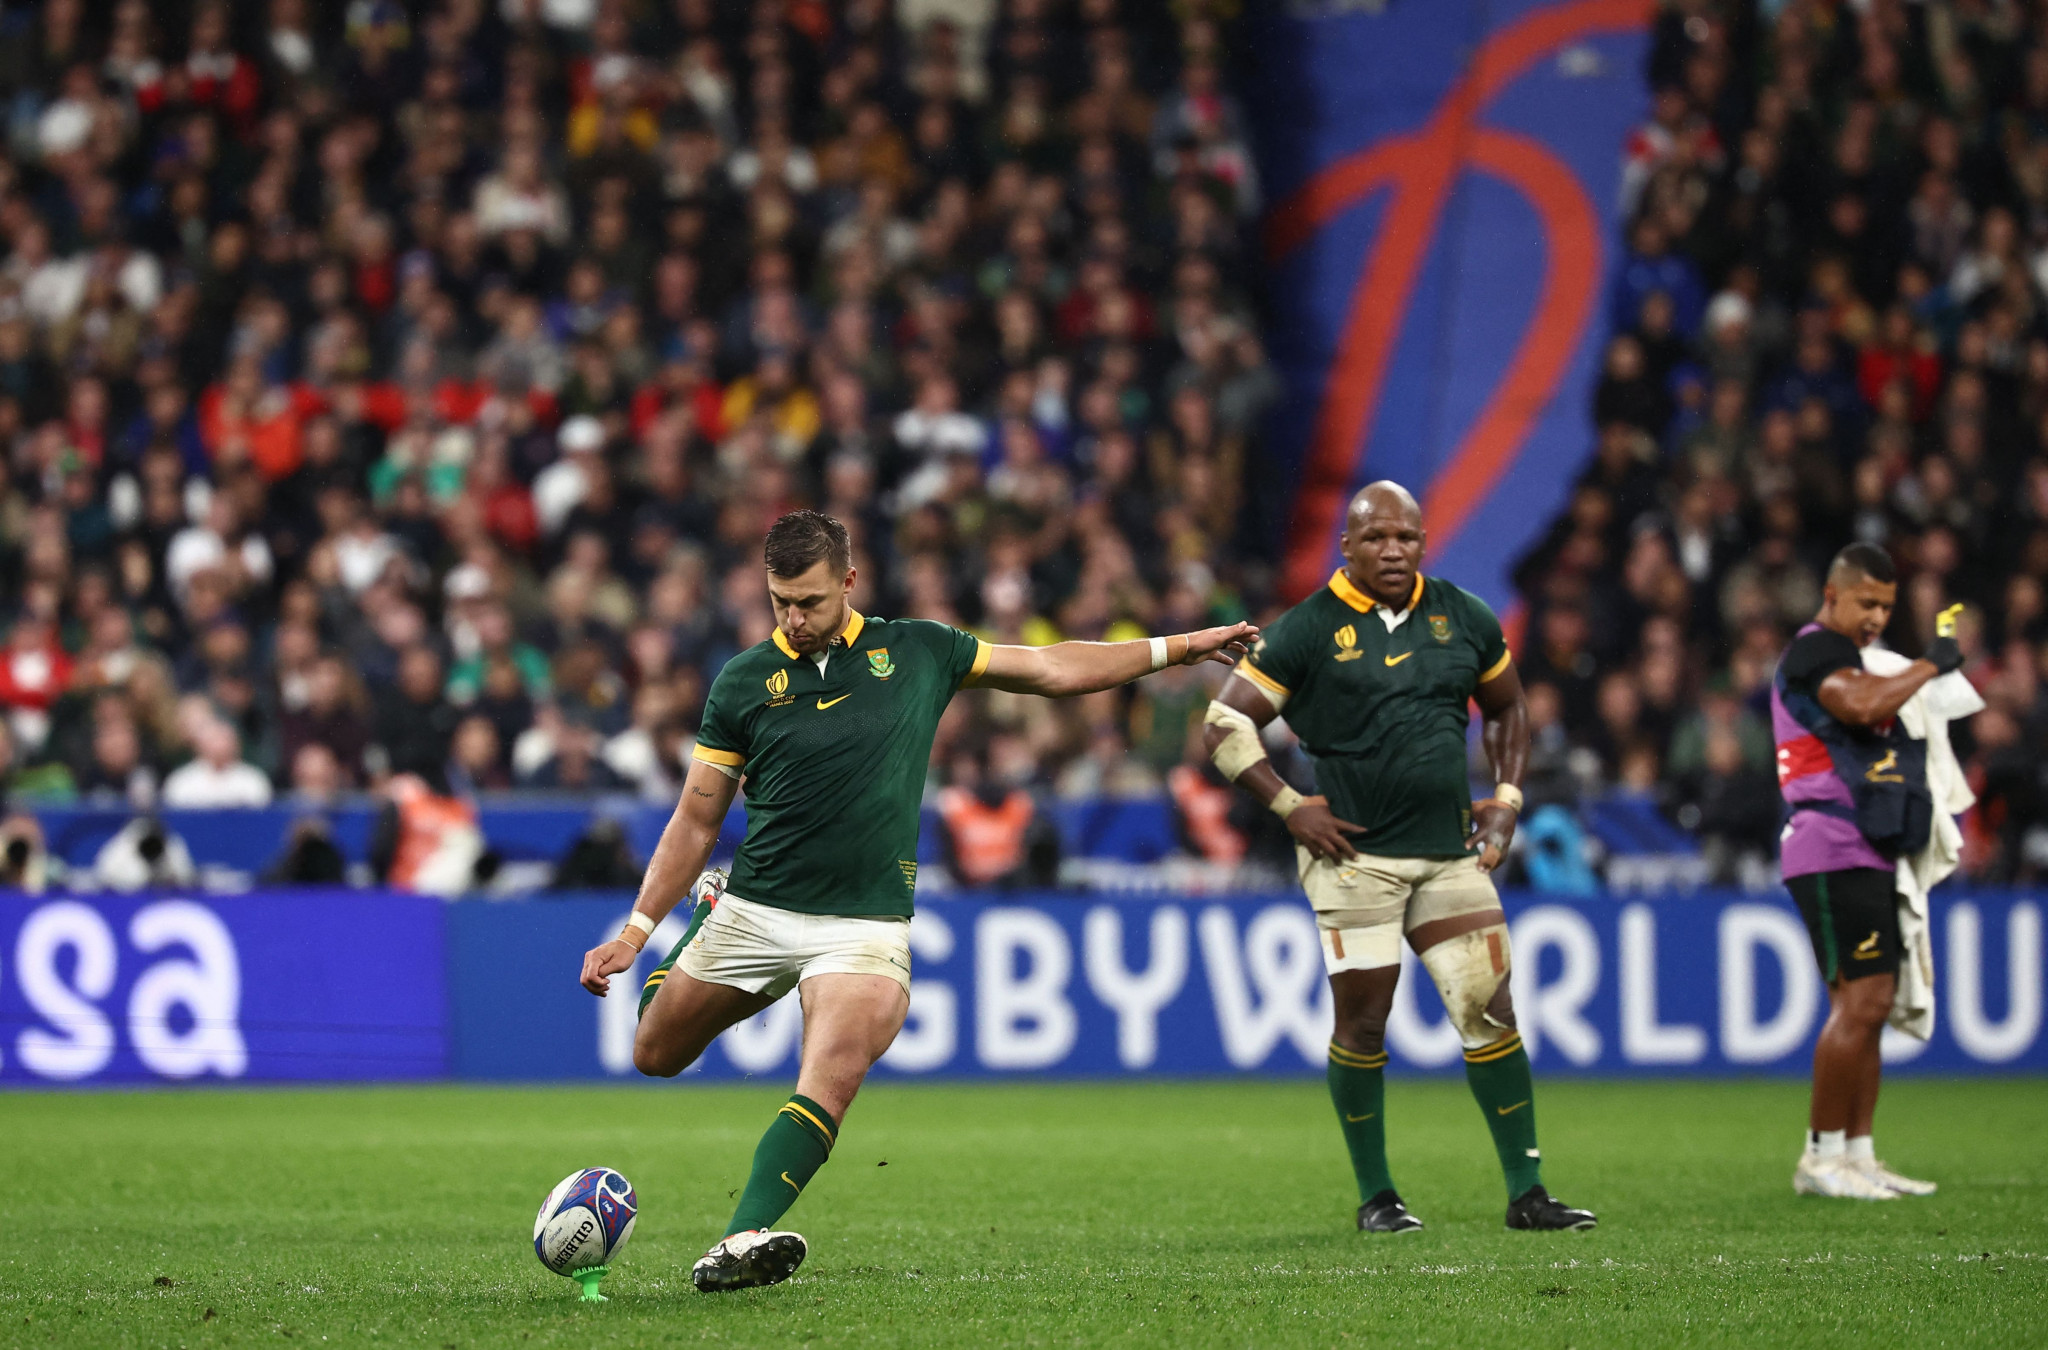 Handré Pollard kicked South Africa into the lead for the first time with under three minutes remaining ©Getty Images